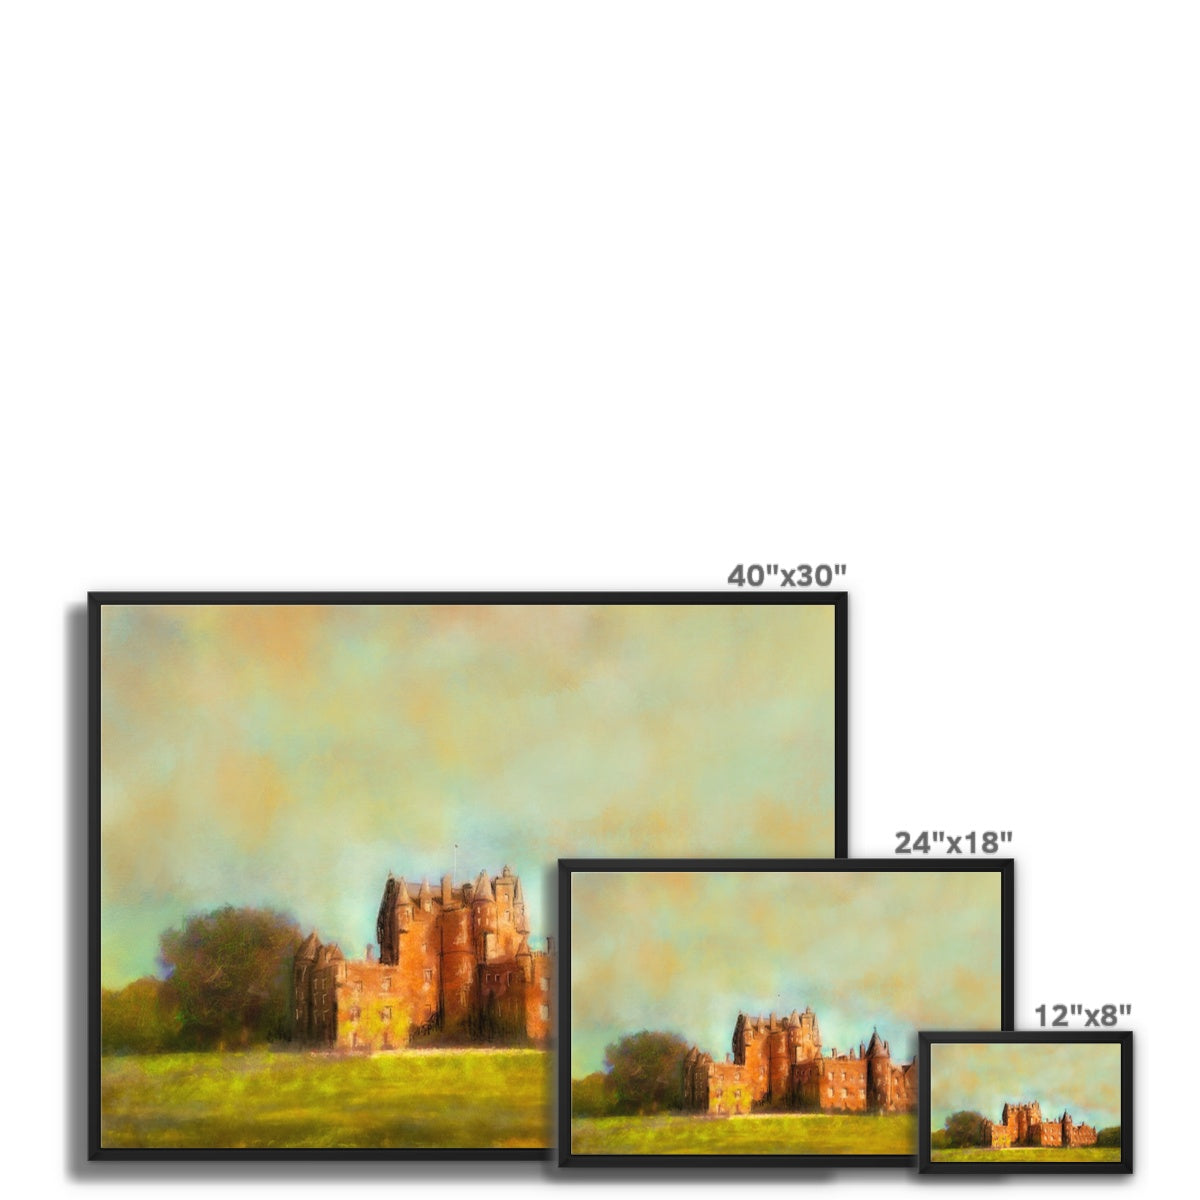 Glamis Castle Painting | Framed Canvas From Scotland-Floating Framed Canvas Prints-Scottish Castles Art Gallery-Paintings, Prints, Homeware, Art Gifts From Scotland By Scottish Artist Kevin Hunter